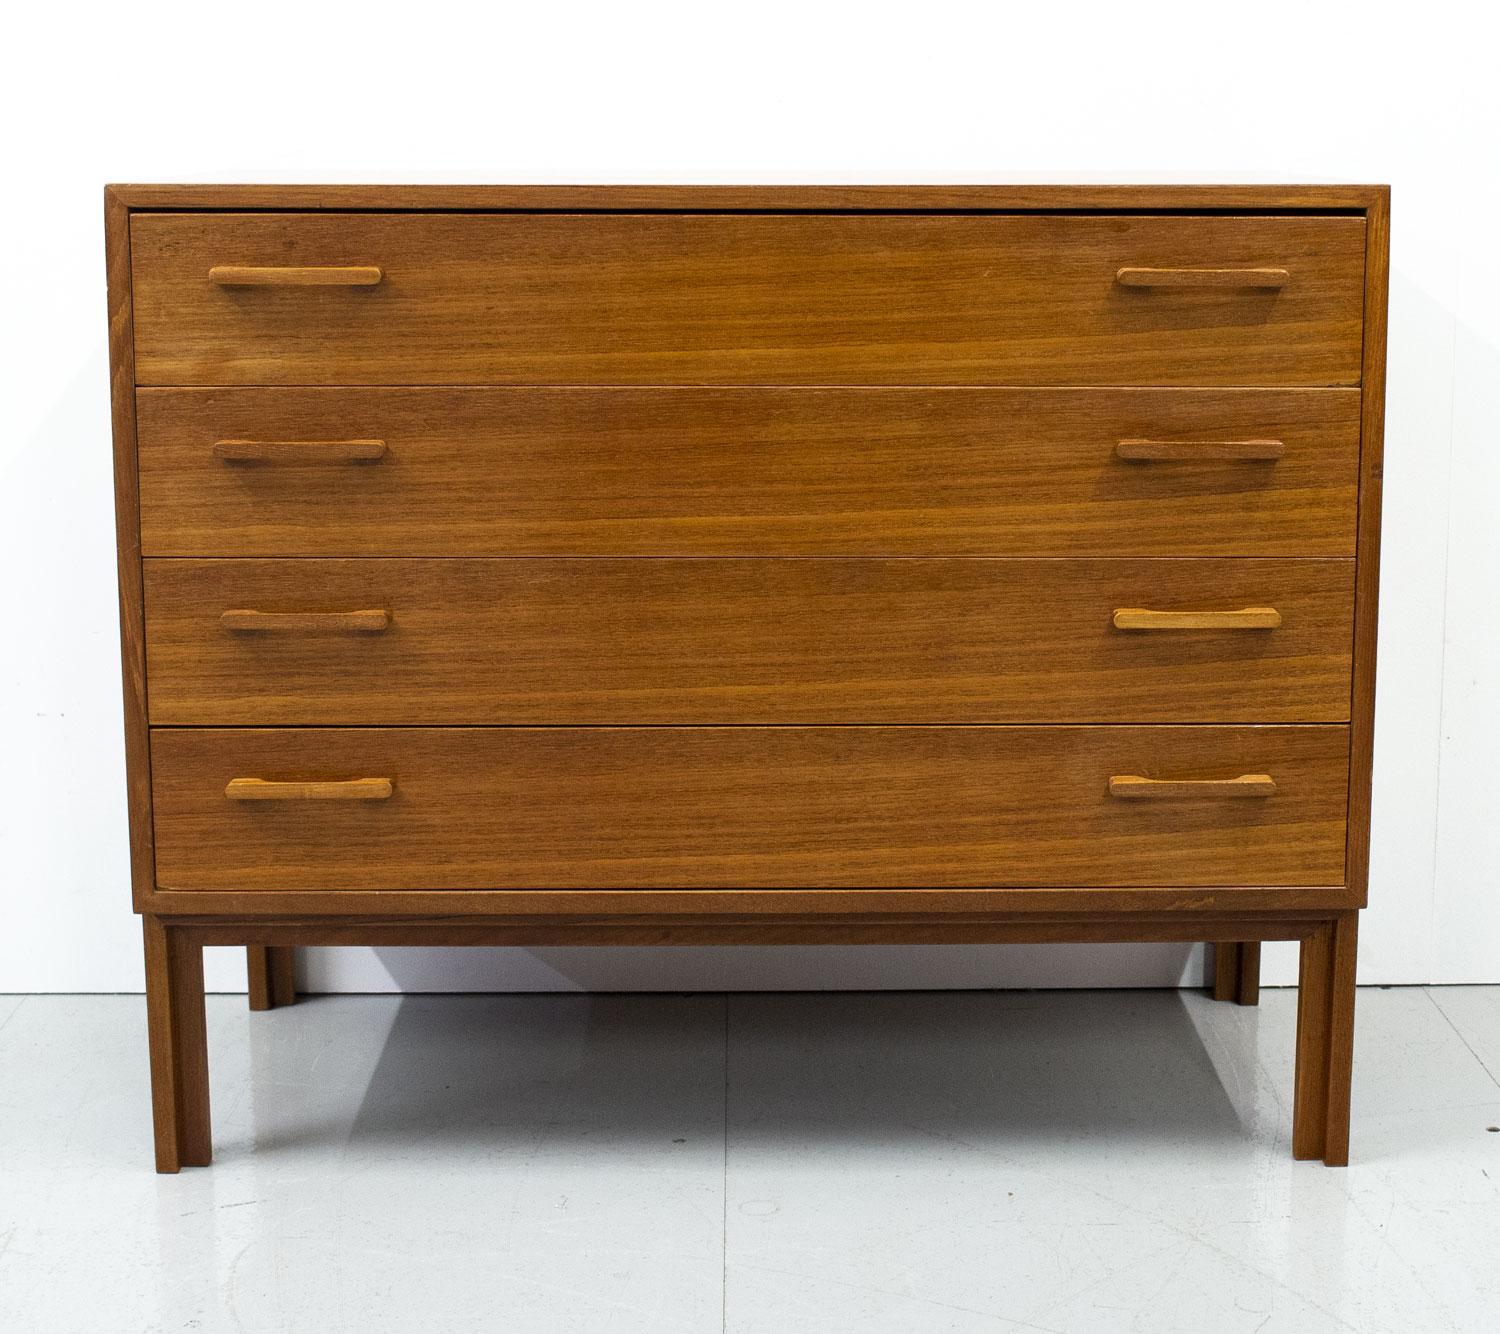 1950s Danish teak chest of drawers designed by Kai Kristiansen for Feldballes Mobelfabrik. A lovely small and practical piece with 4 drawers and solid teak handles and legs.